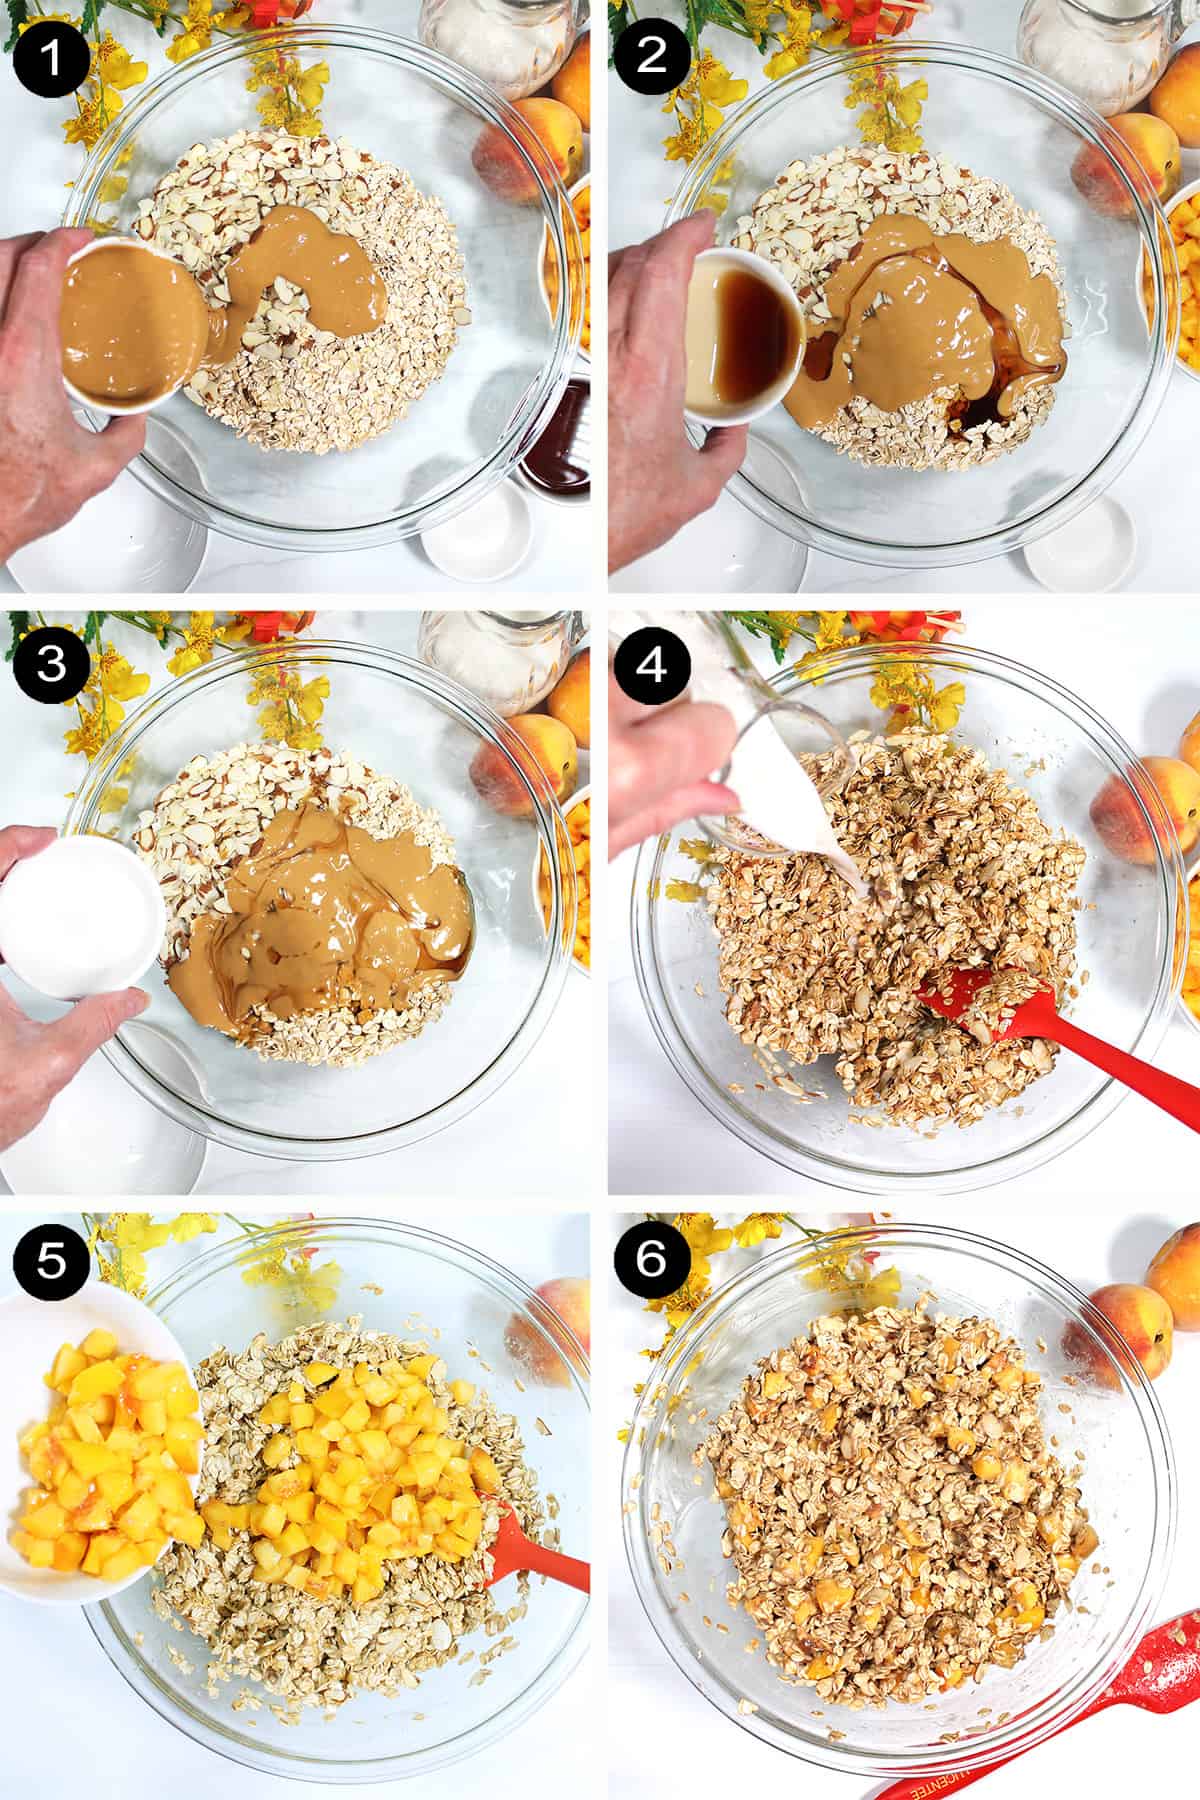 Steps to make healthy peach muffins.